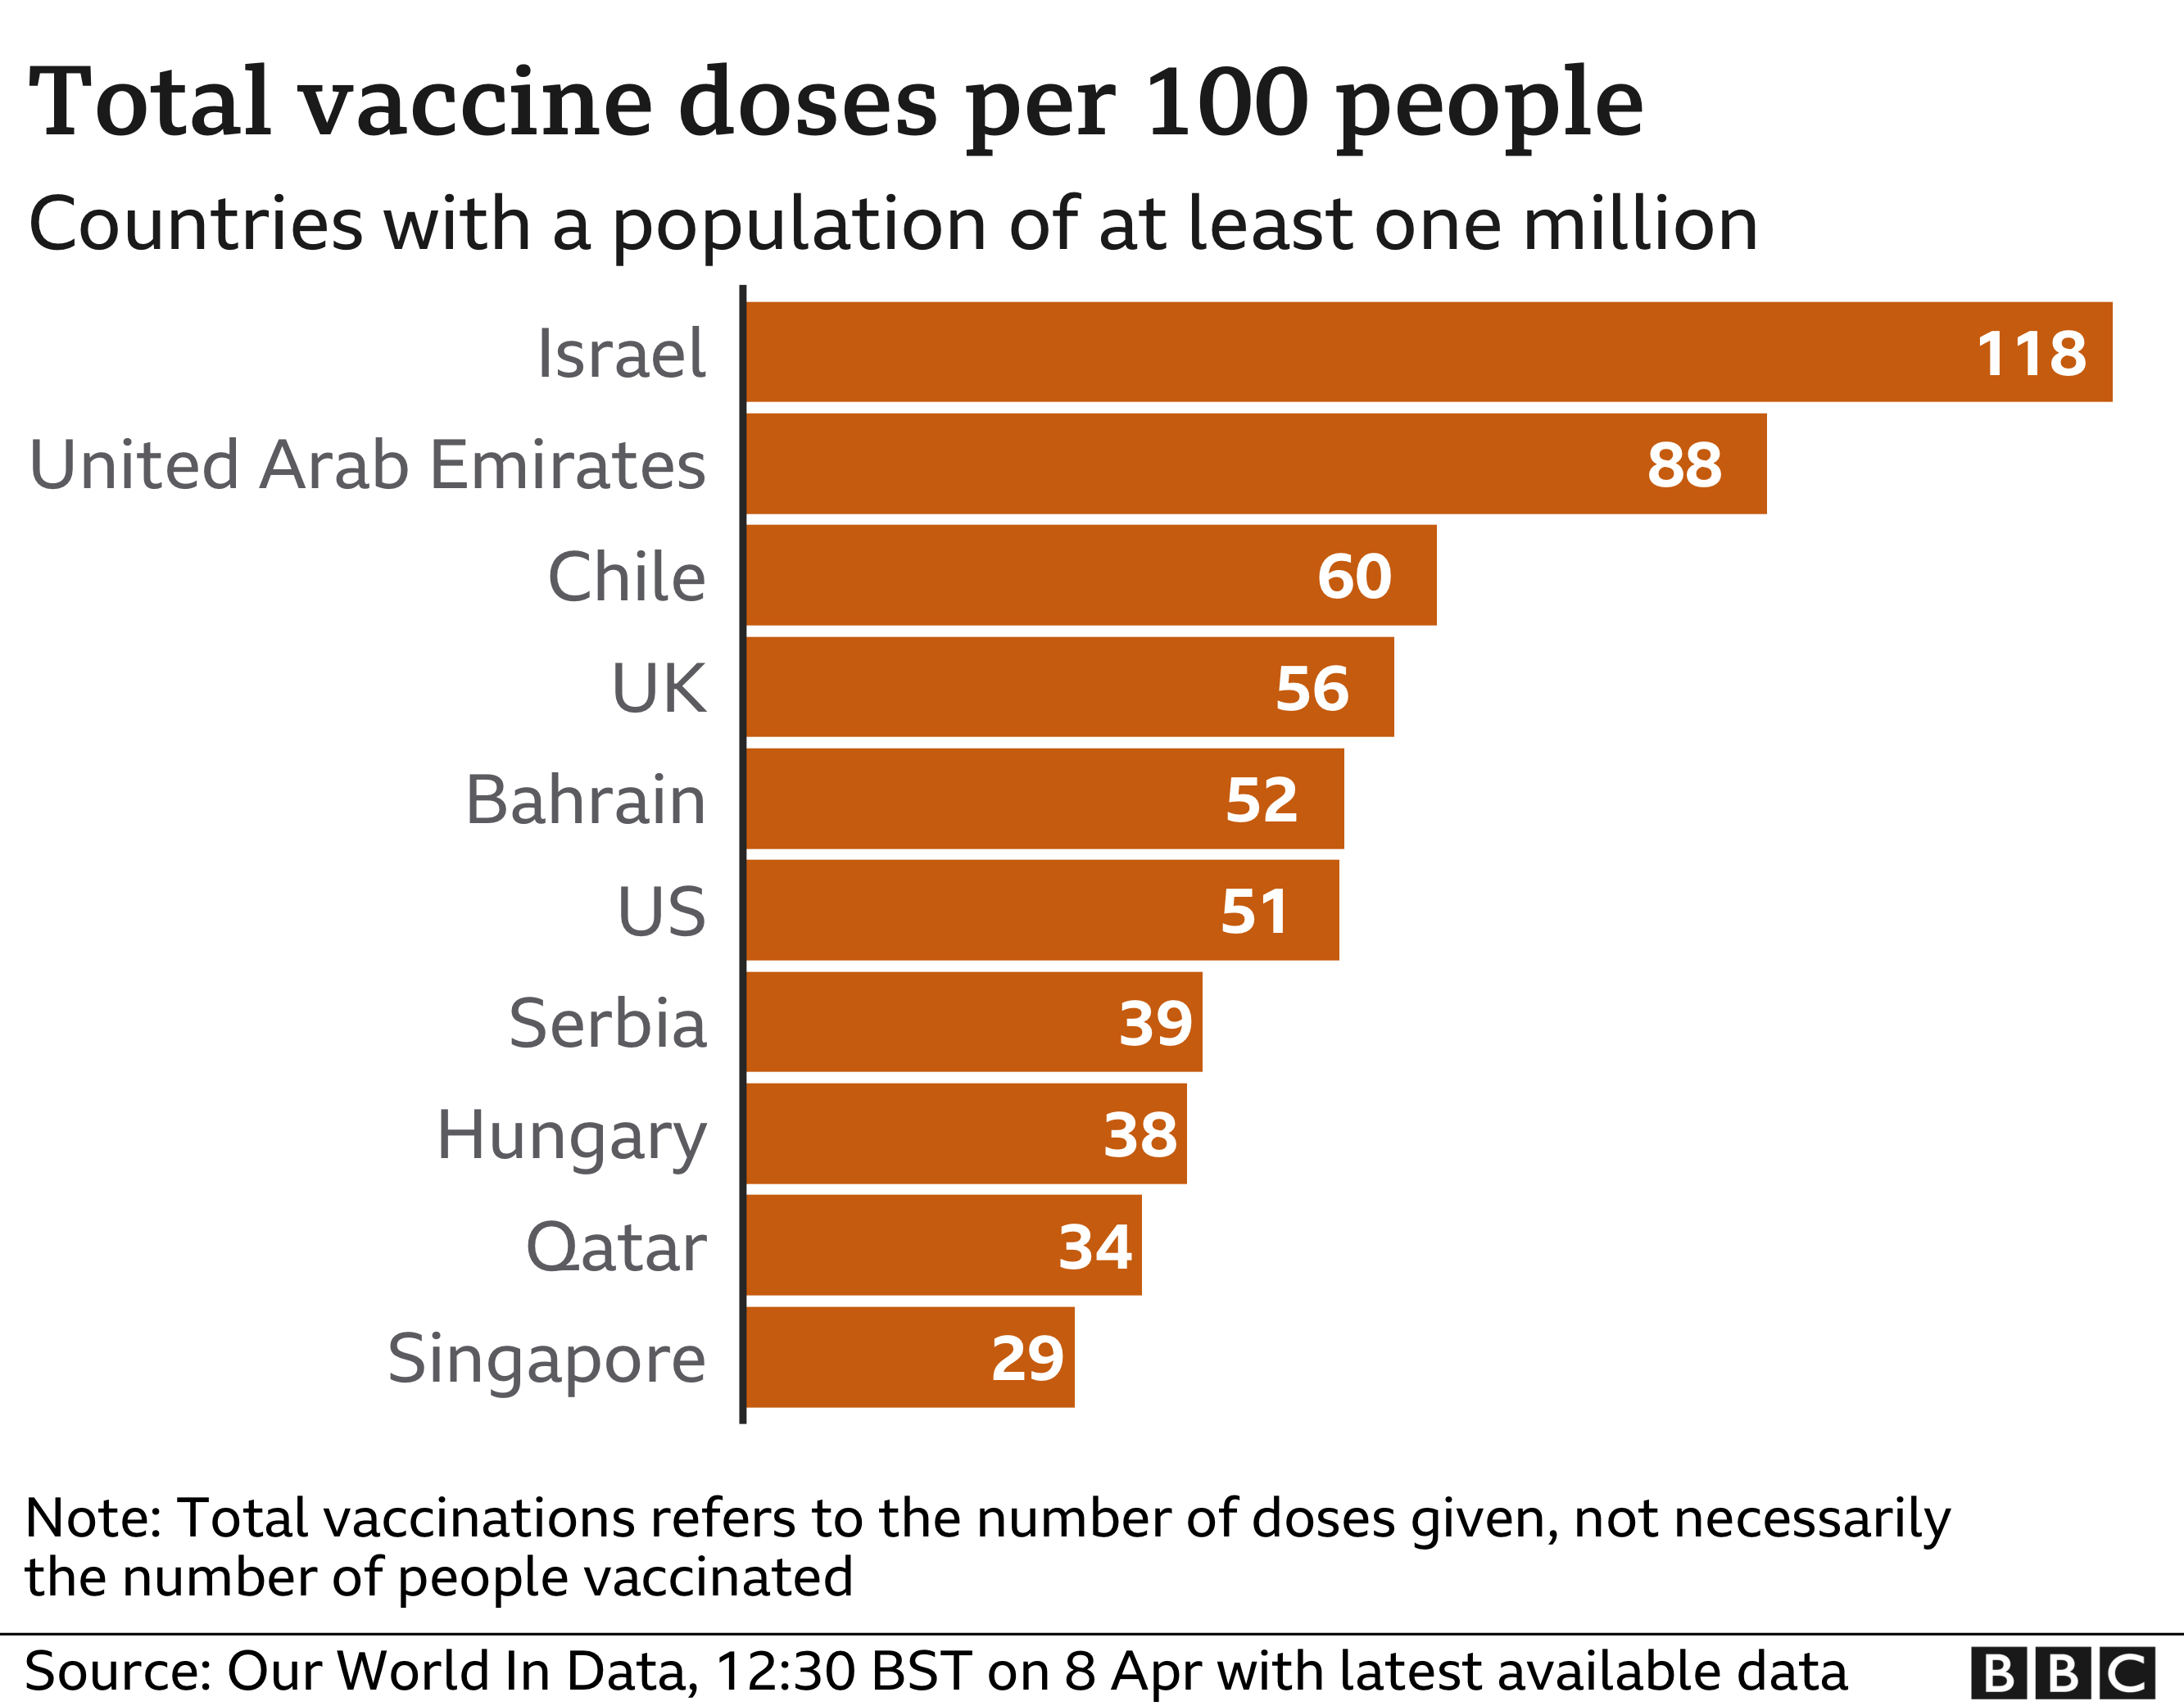 Chart showing vaccine doses per 100 people in countries where the population is over one million